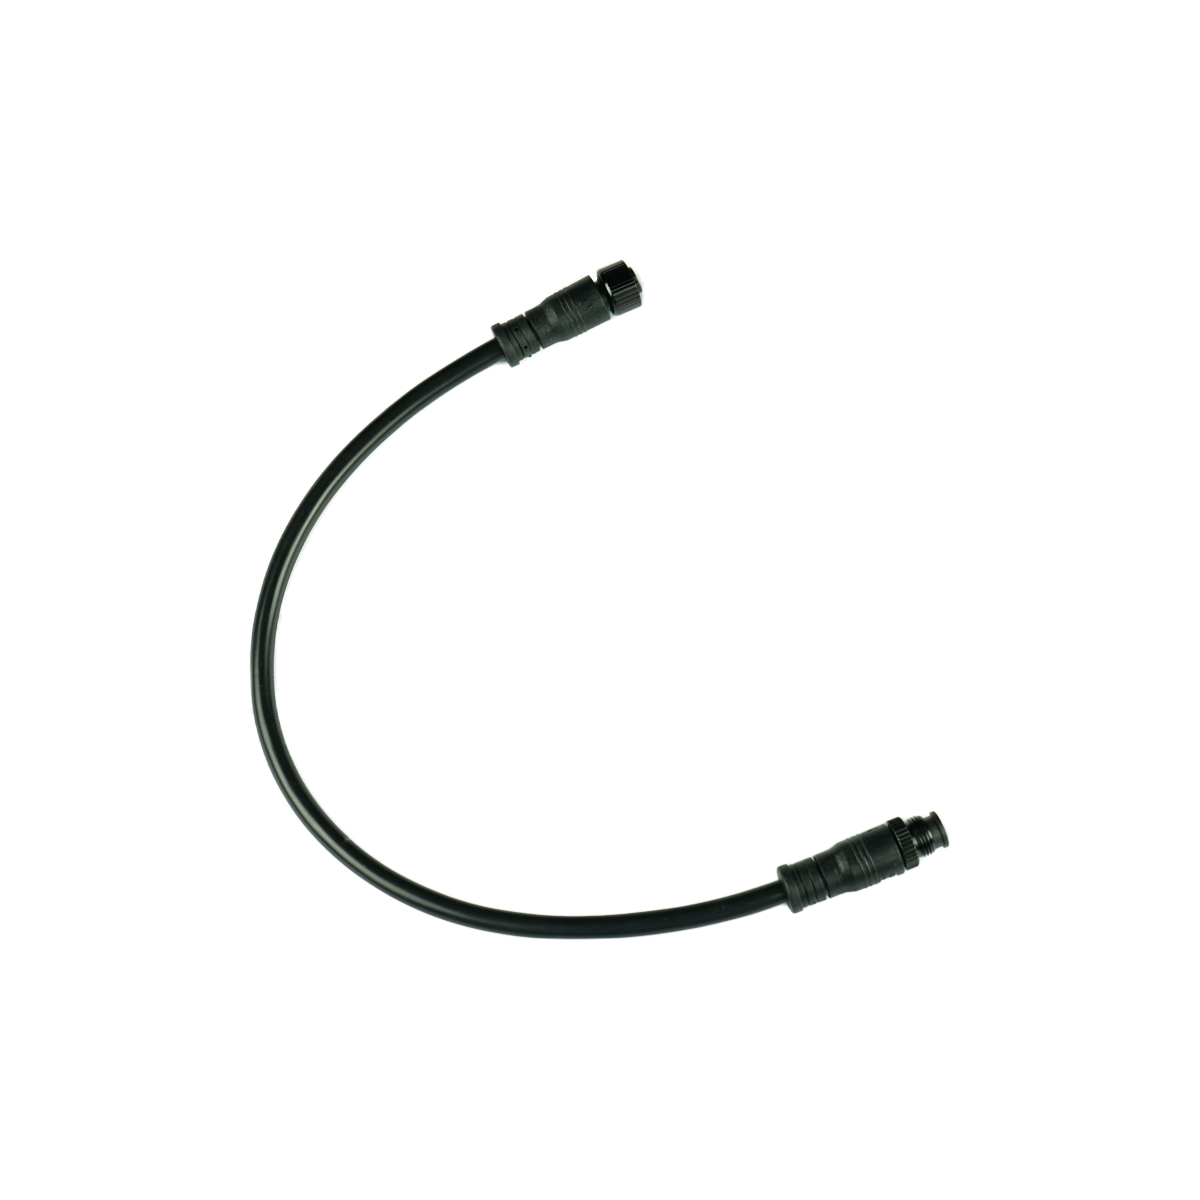 Bistro Light Extension Cable